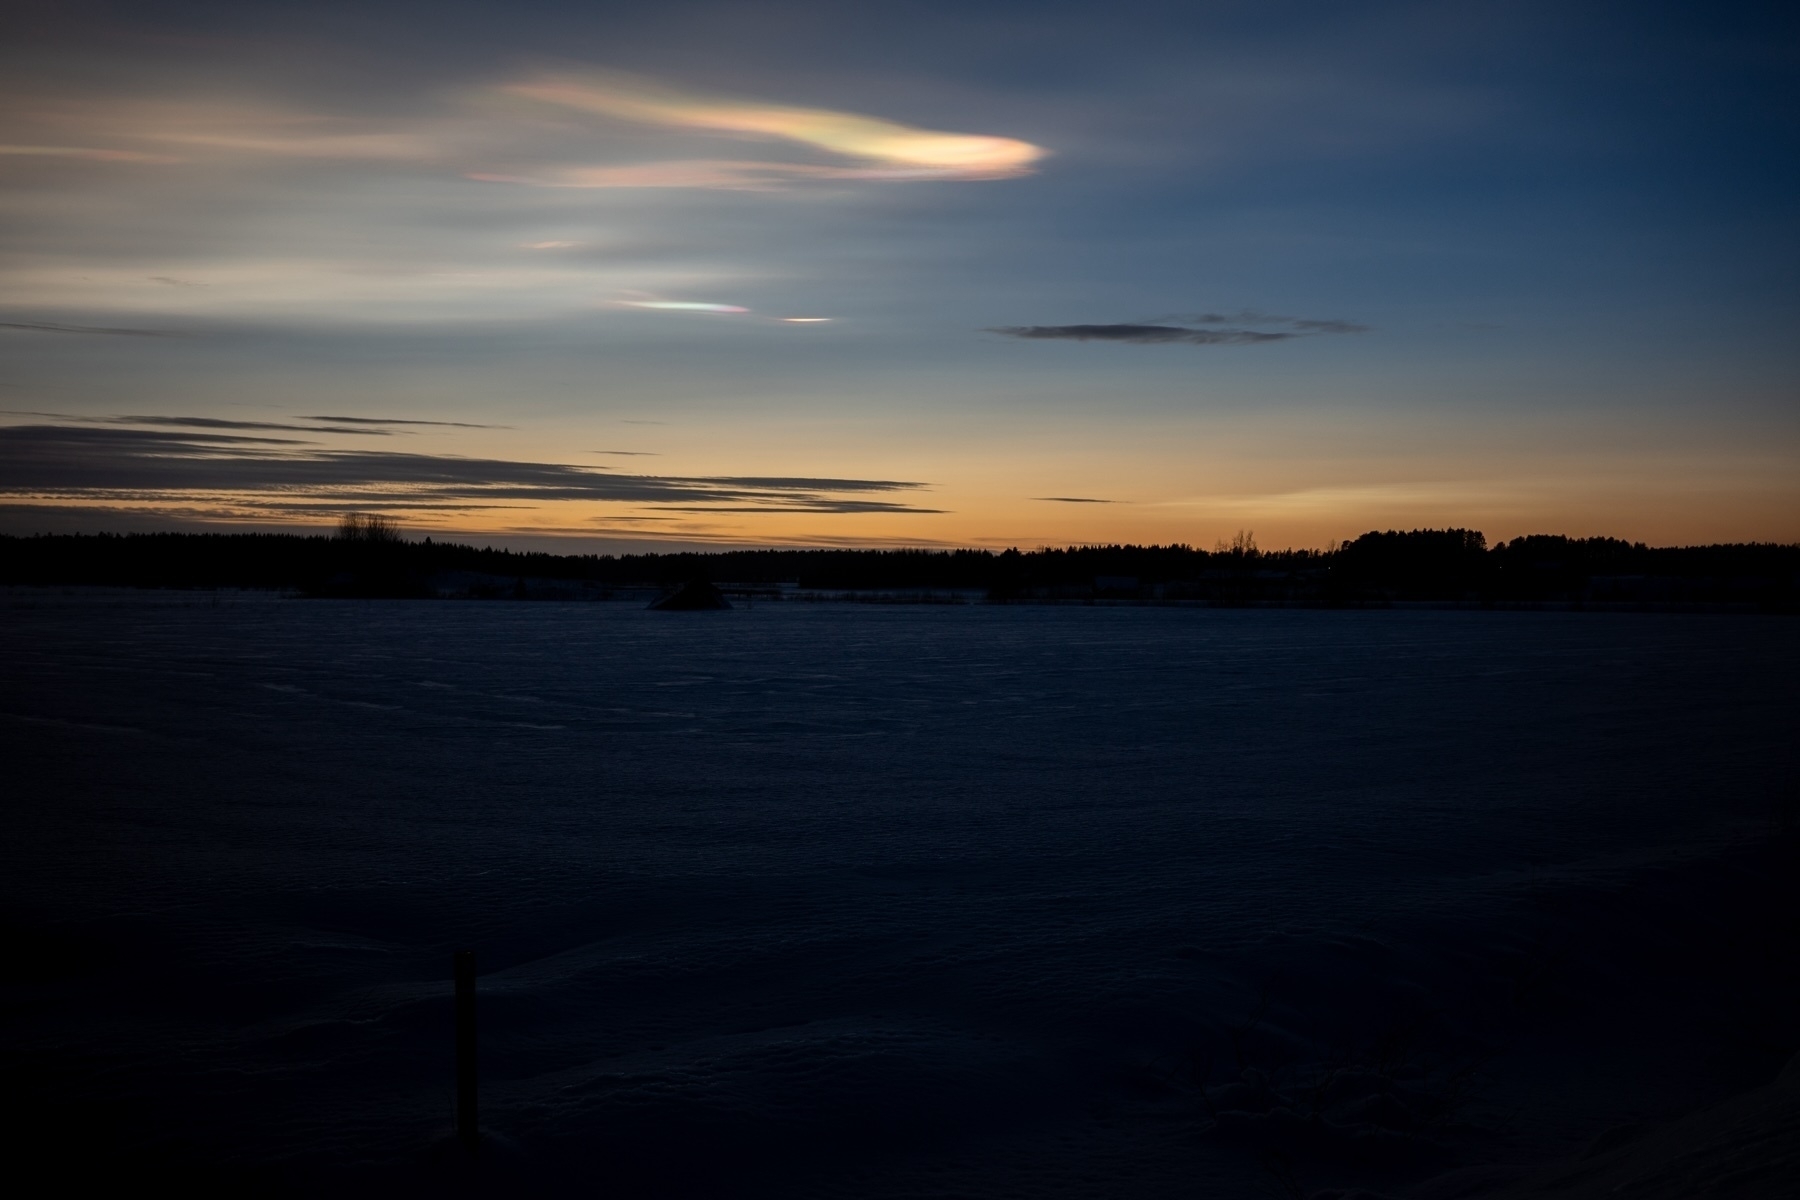 A snow-covered landscape at dusk with a colorful sky featuring a prominent streak of iridescent cloud.